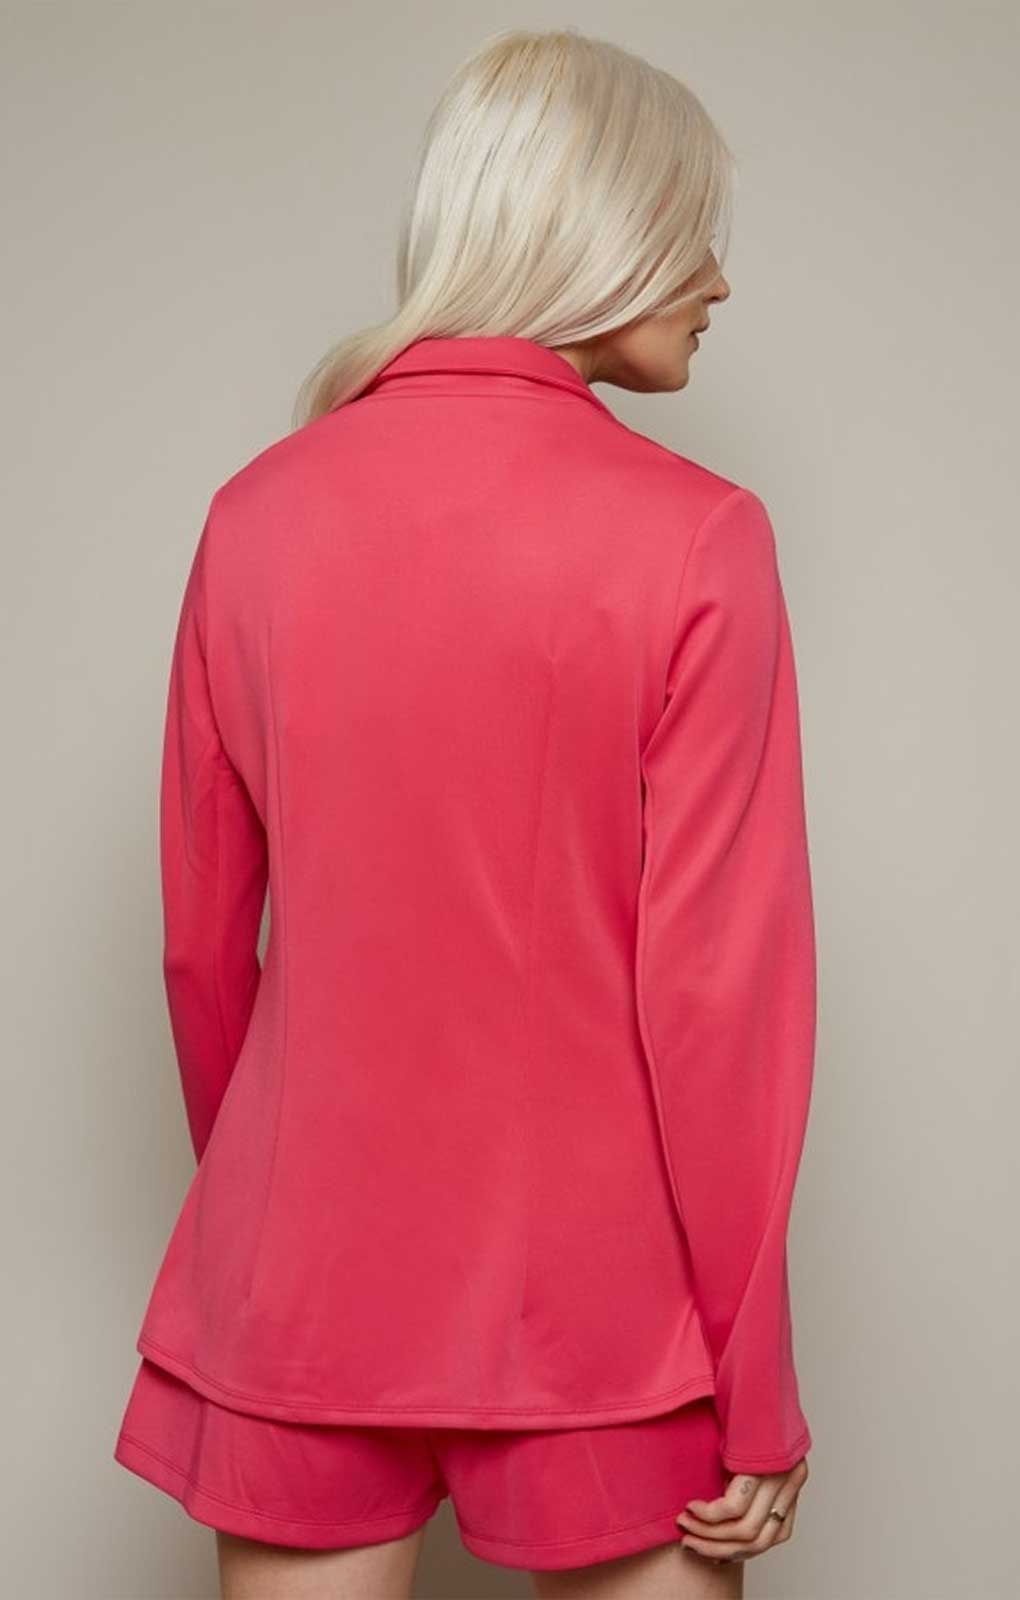 Hot Pink Double-Breasted Belted Blazer product image